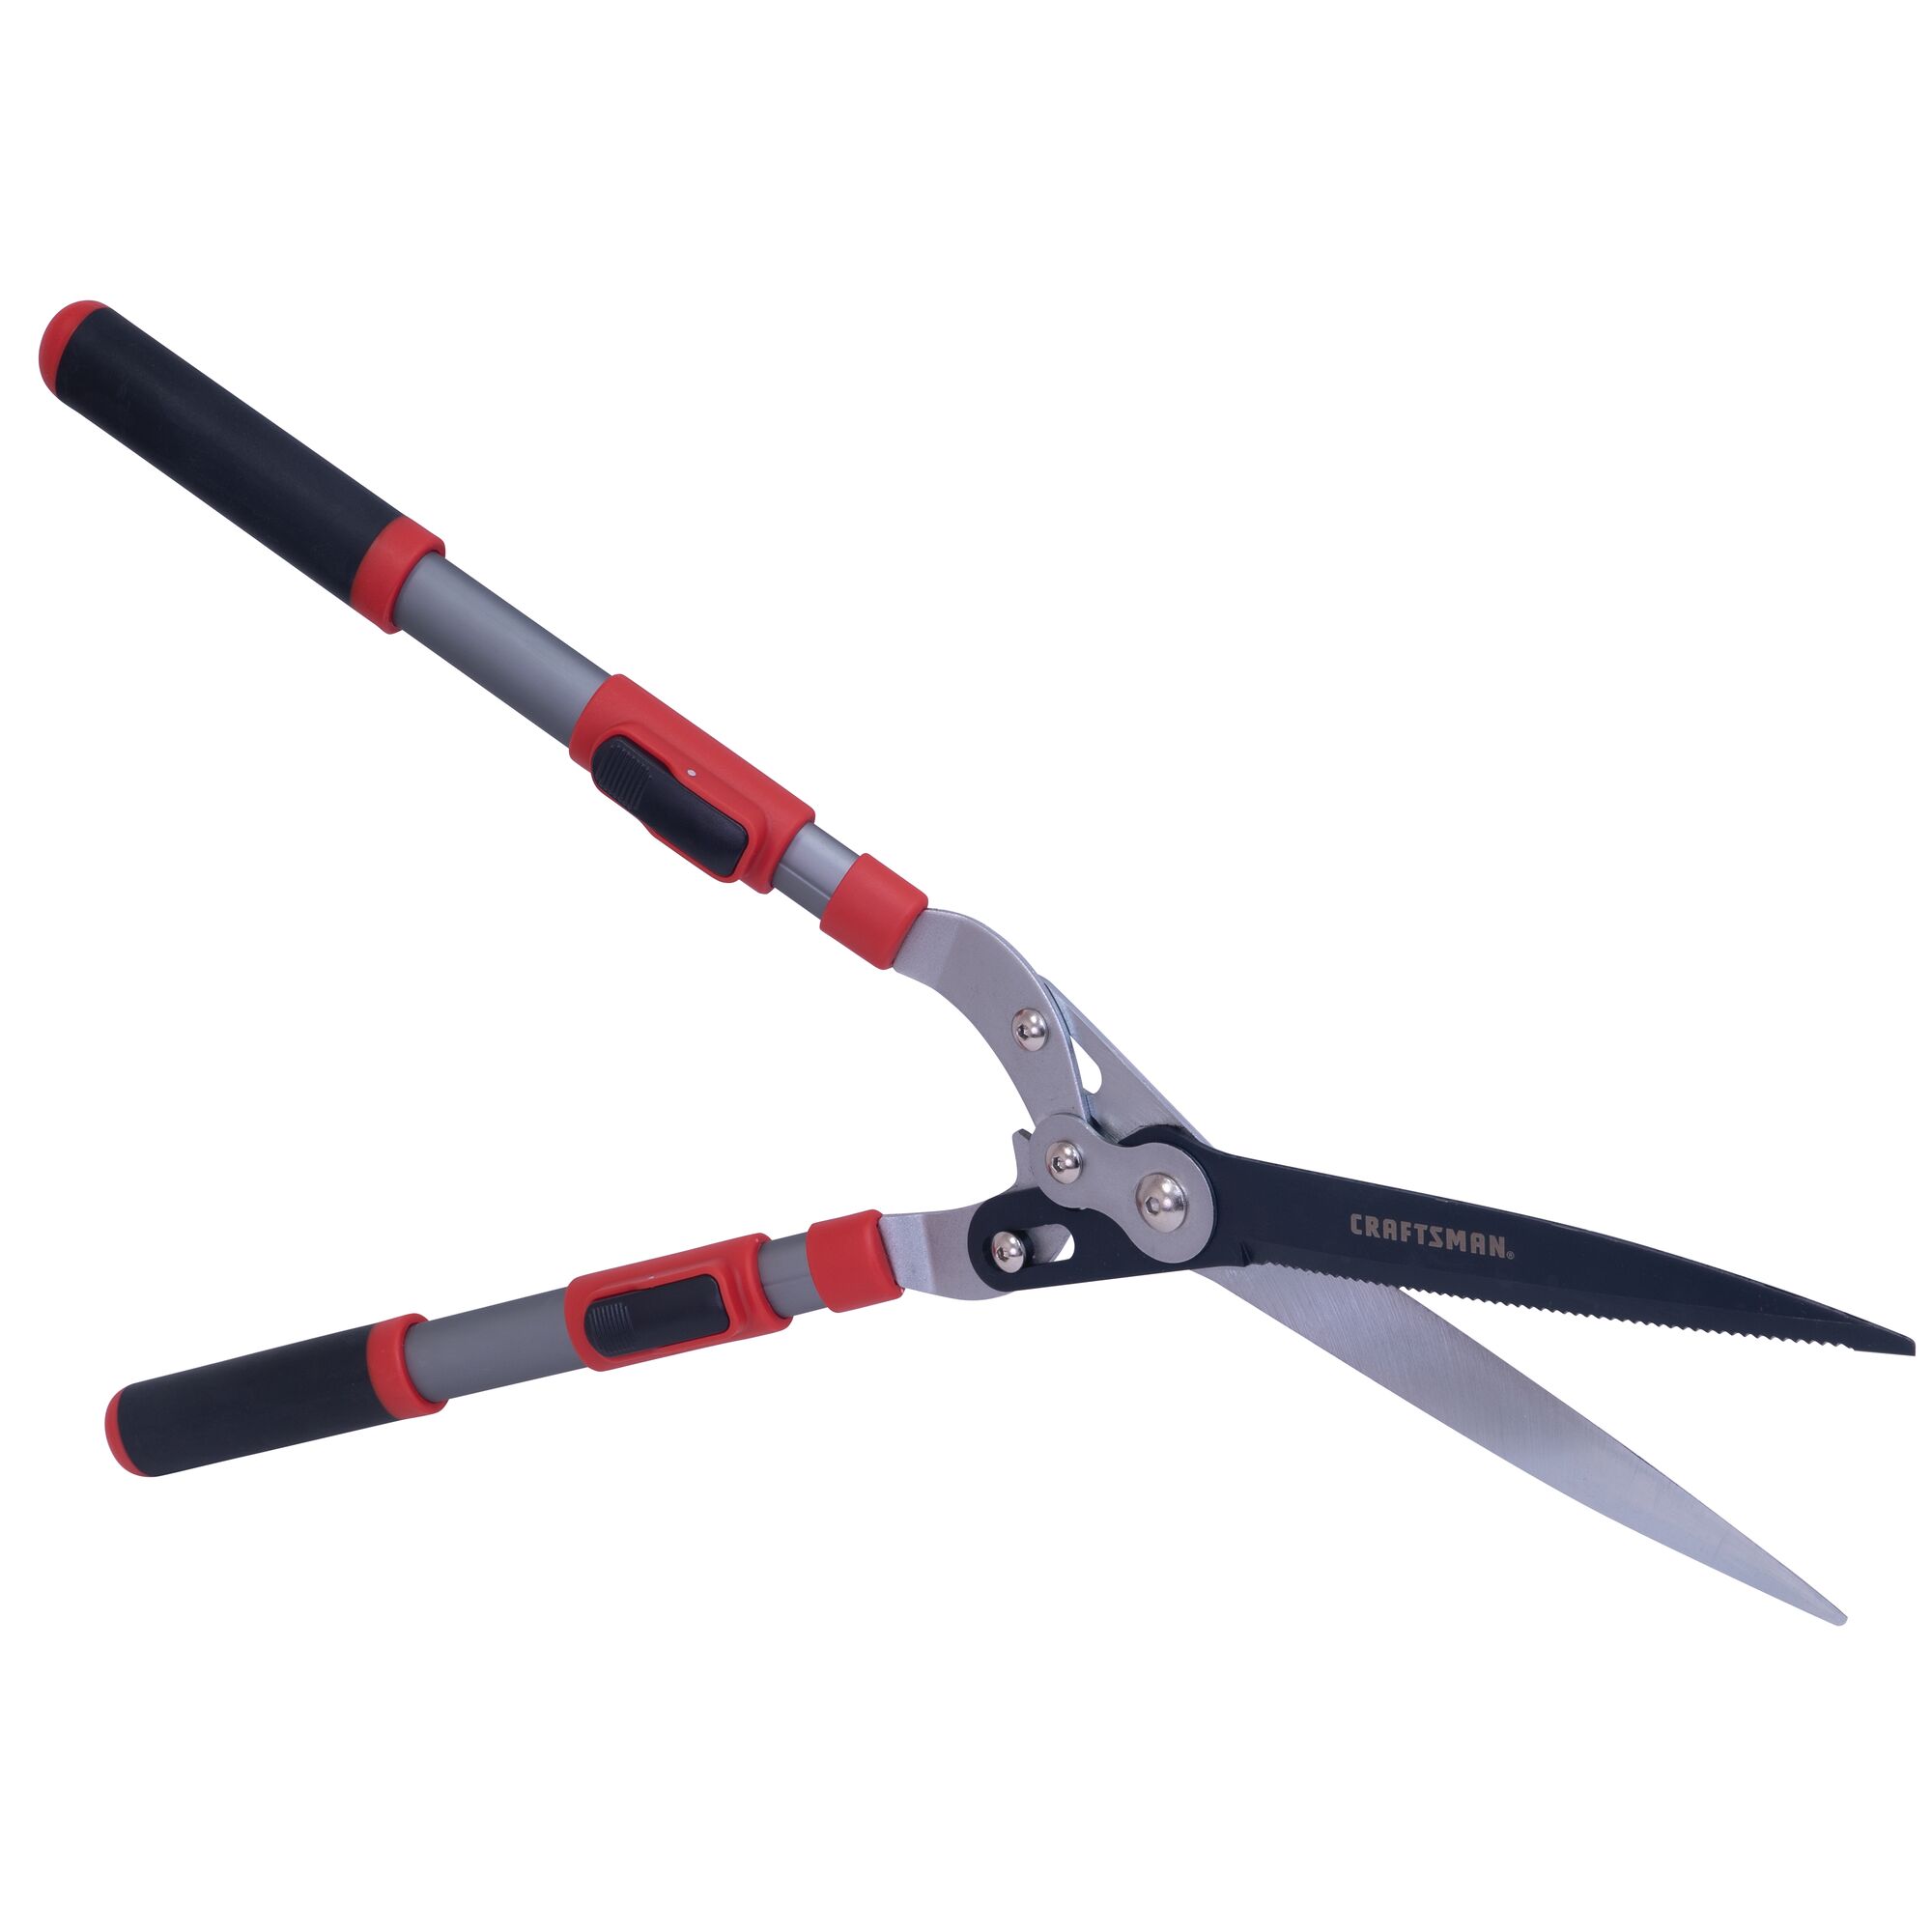 Right profile of hedge shears with compound action blade and telescoping handles.